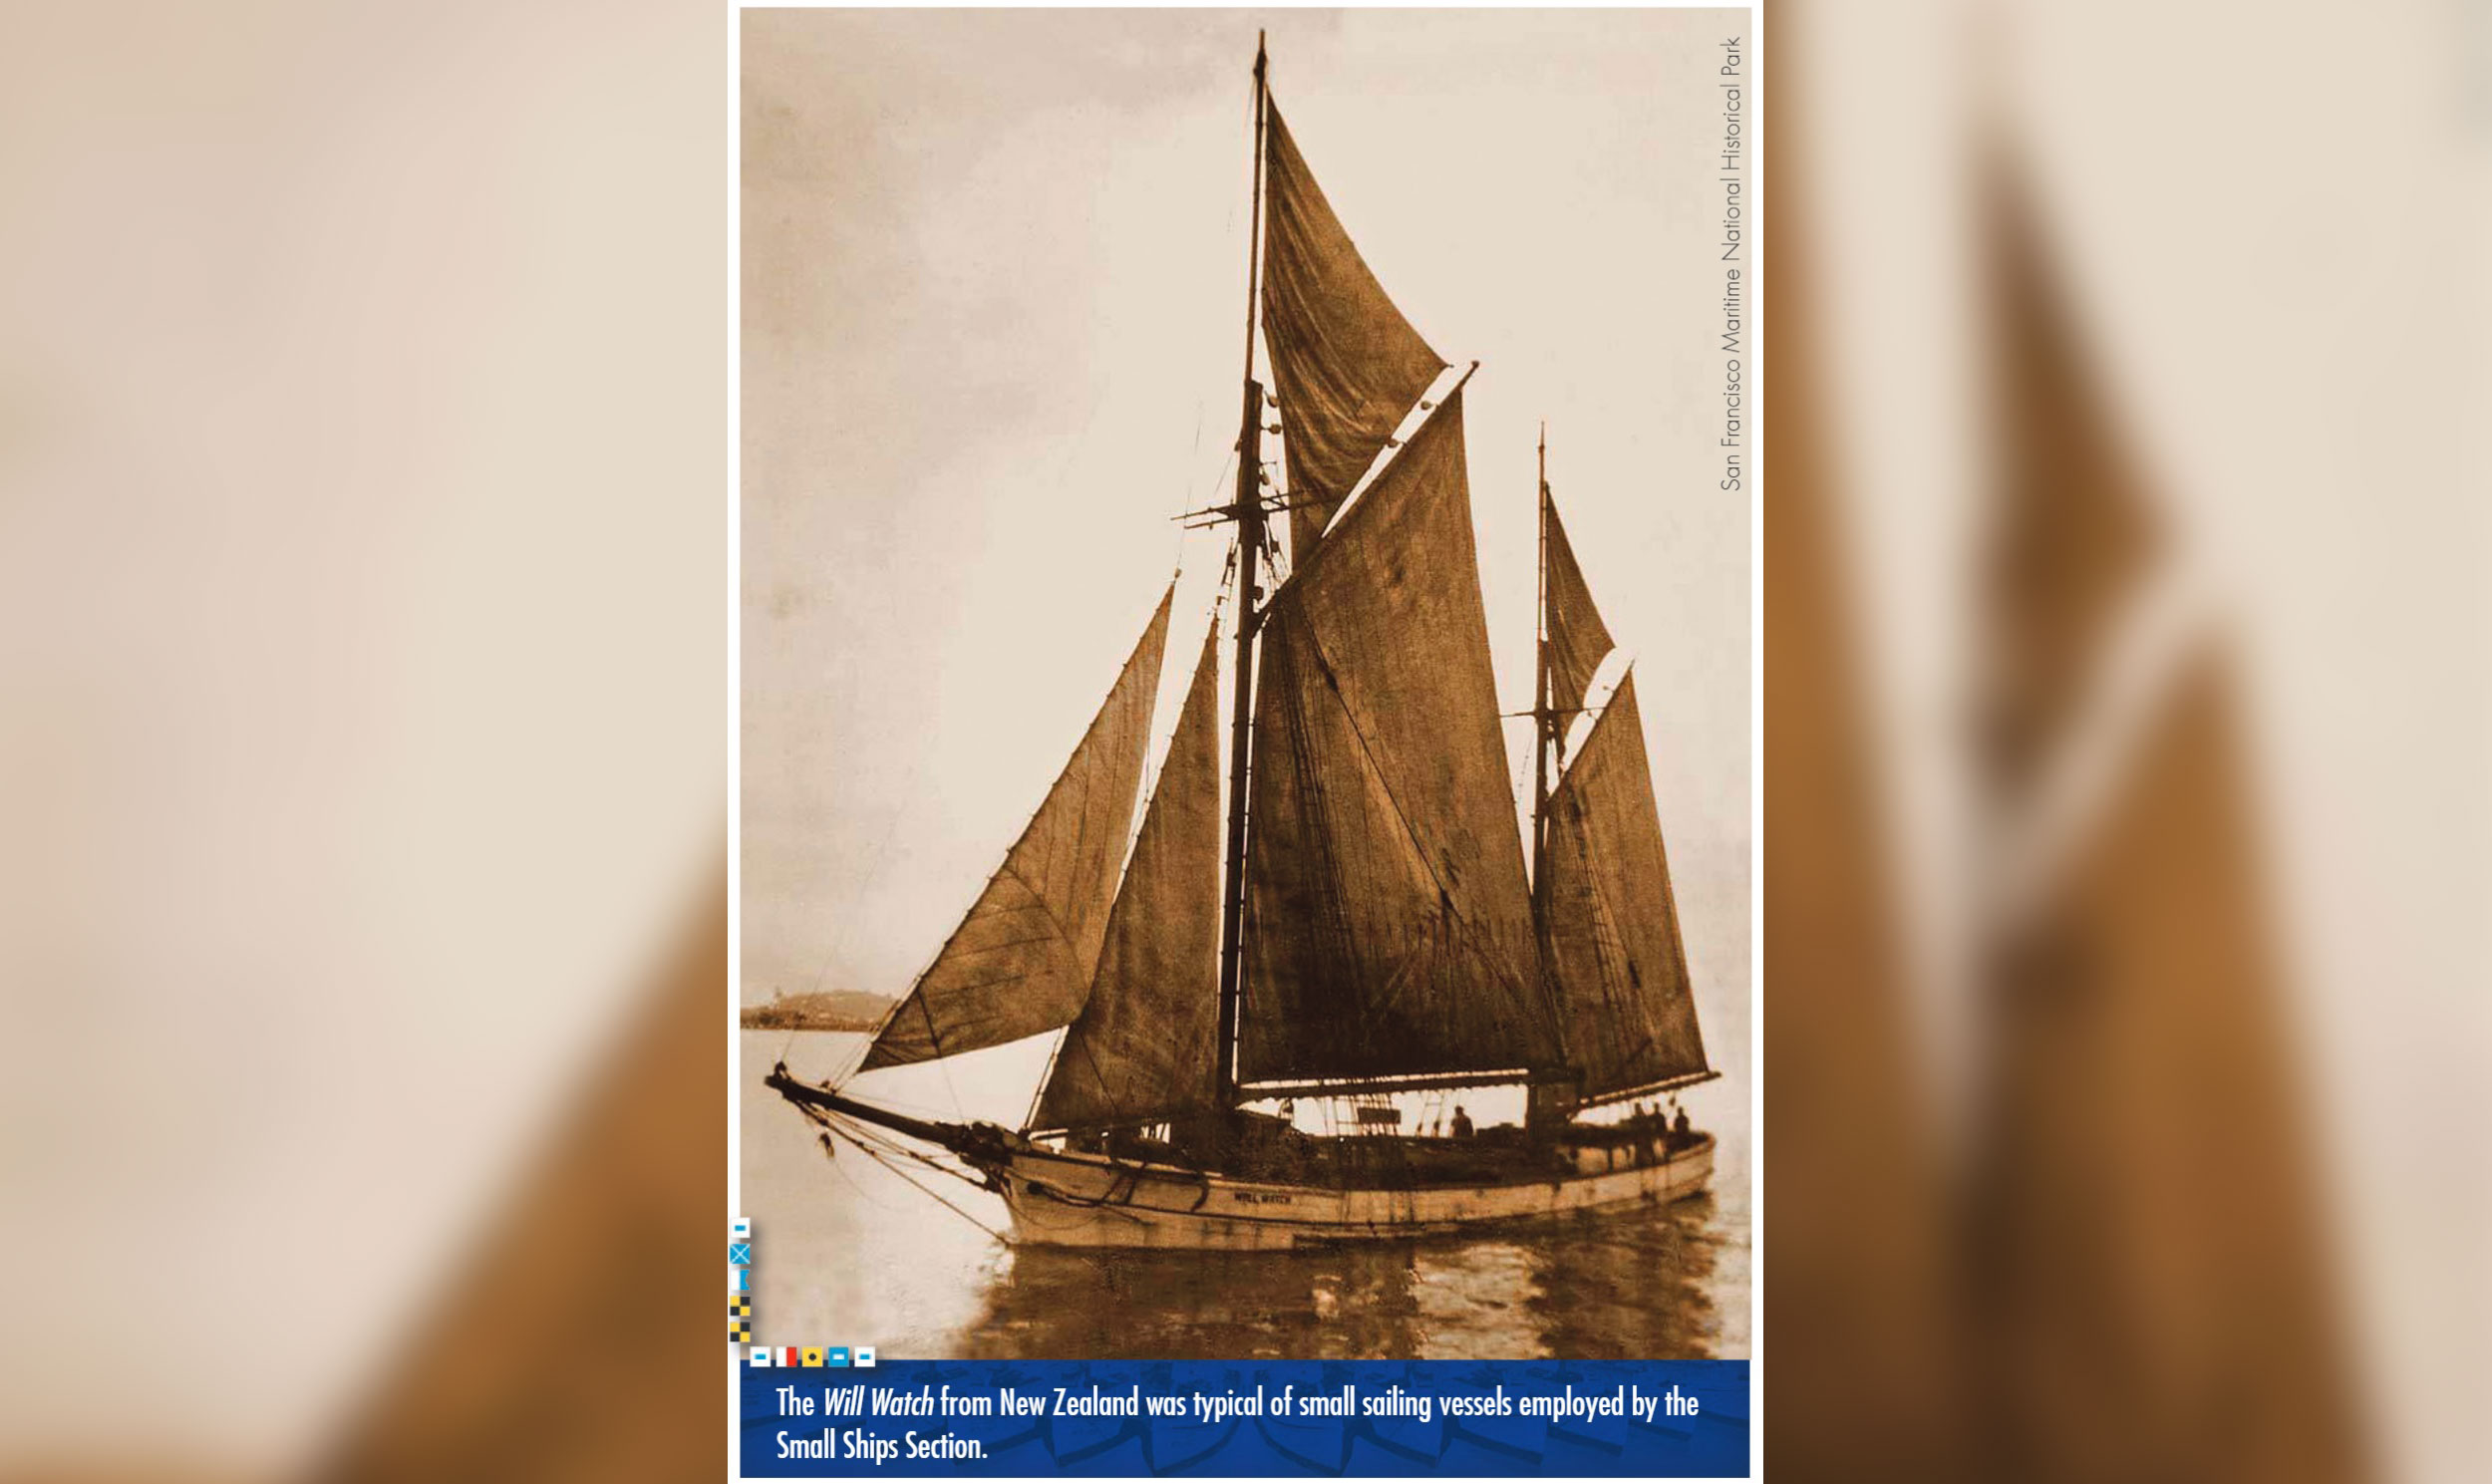 The Will Watch from New Zealand was typical of small sailing vessels employed by the Small Ships Section. San Francisco Maritime National Historical Park. 